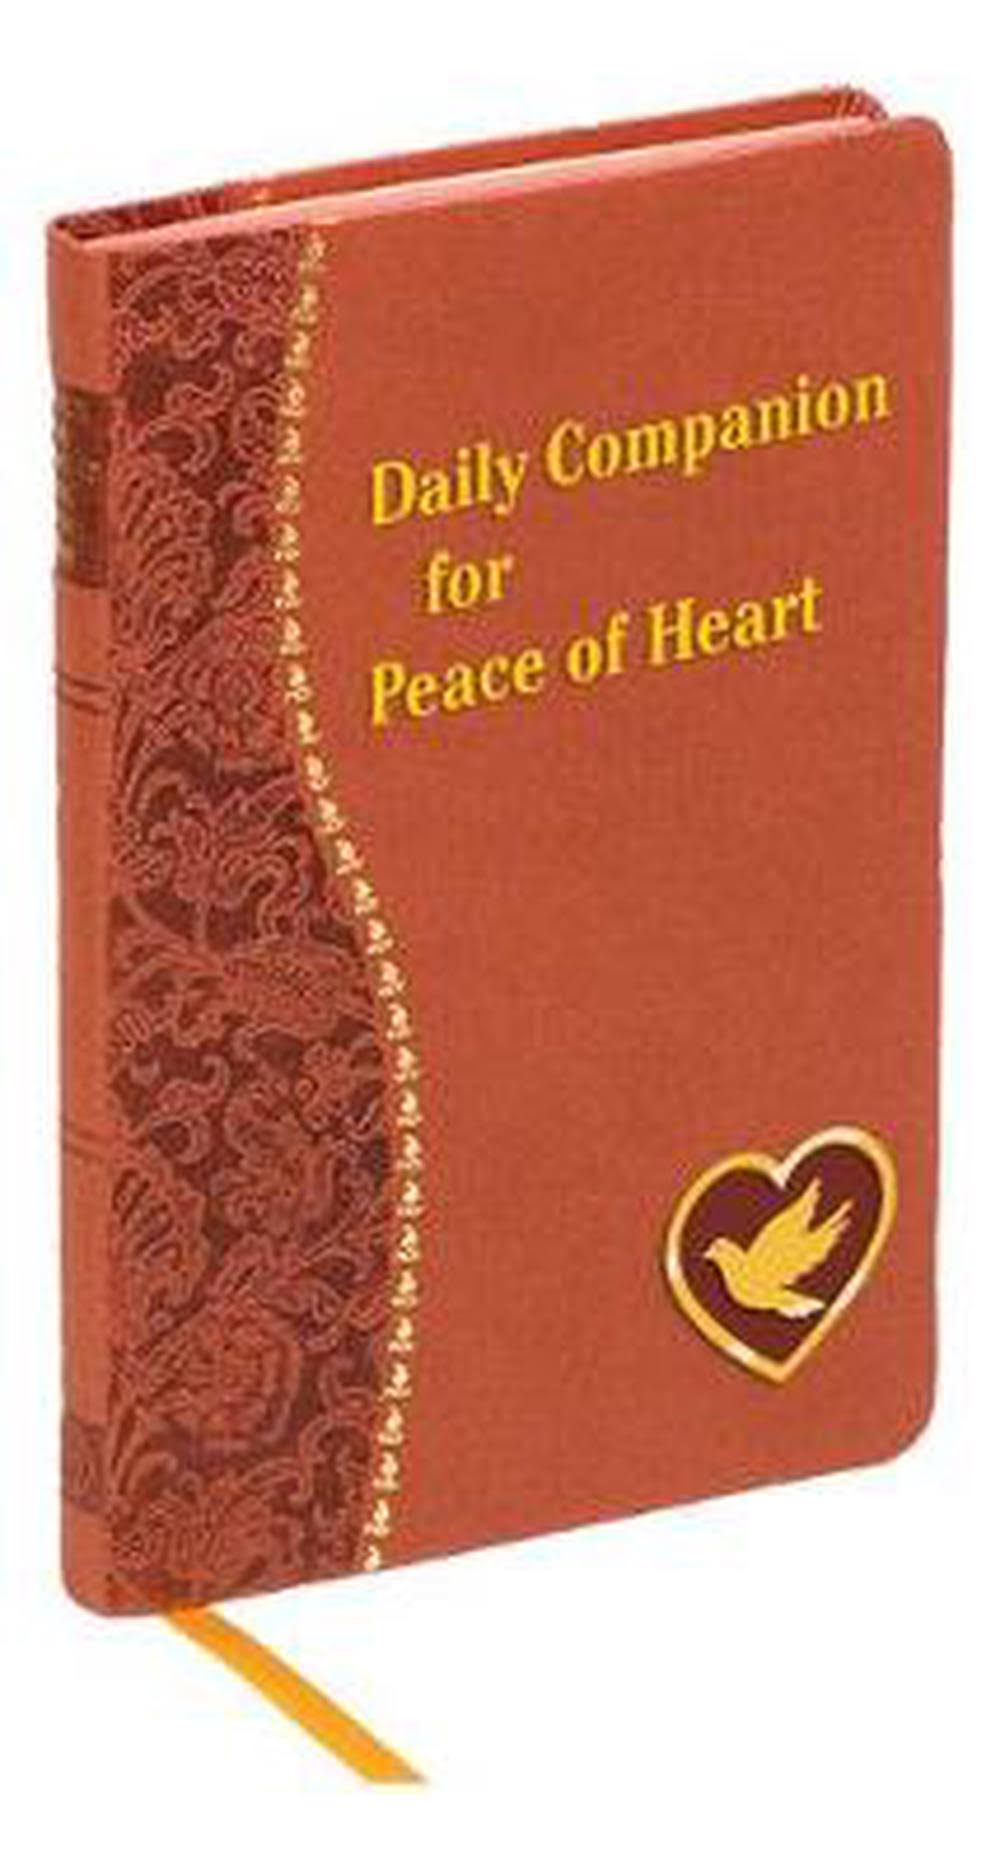 Daily Companion For Peace of Heart